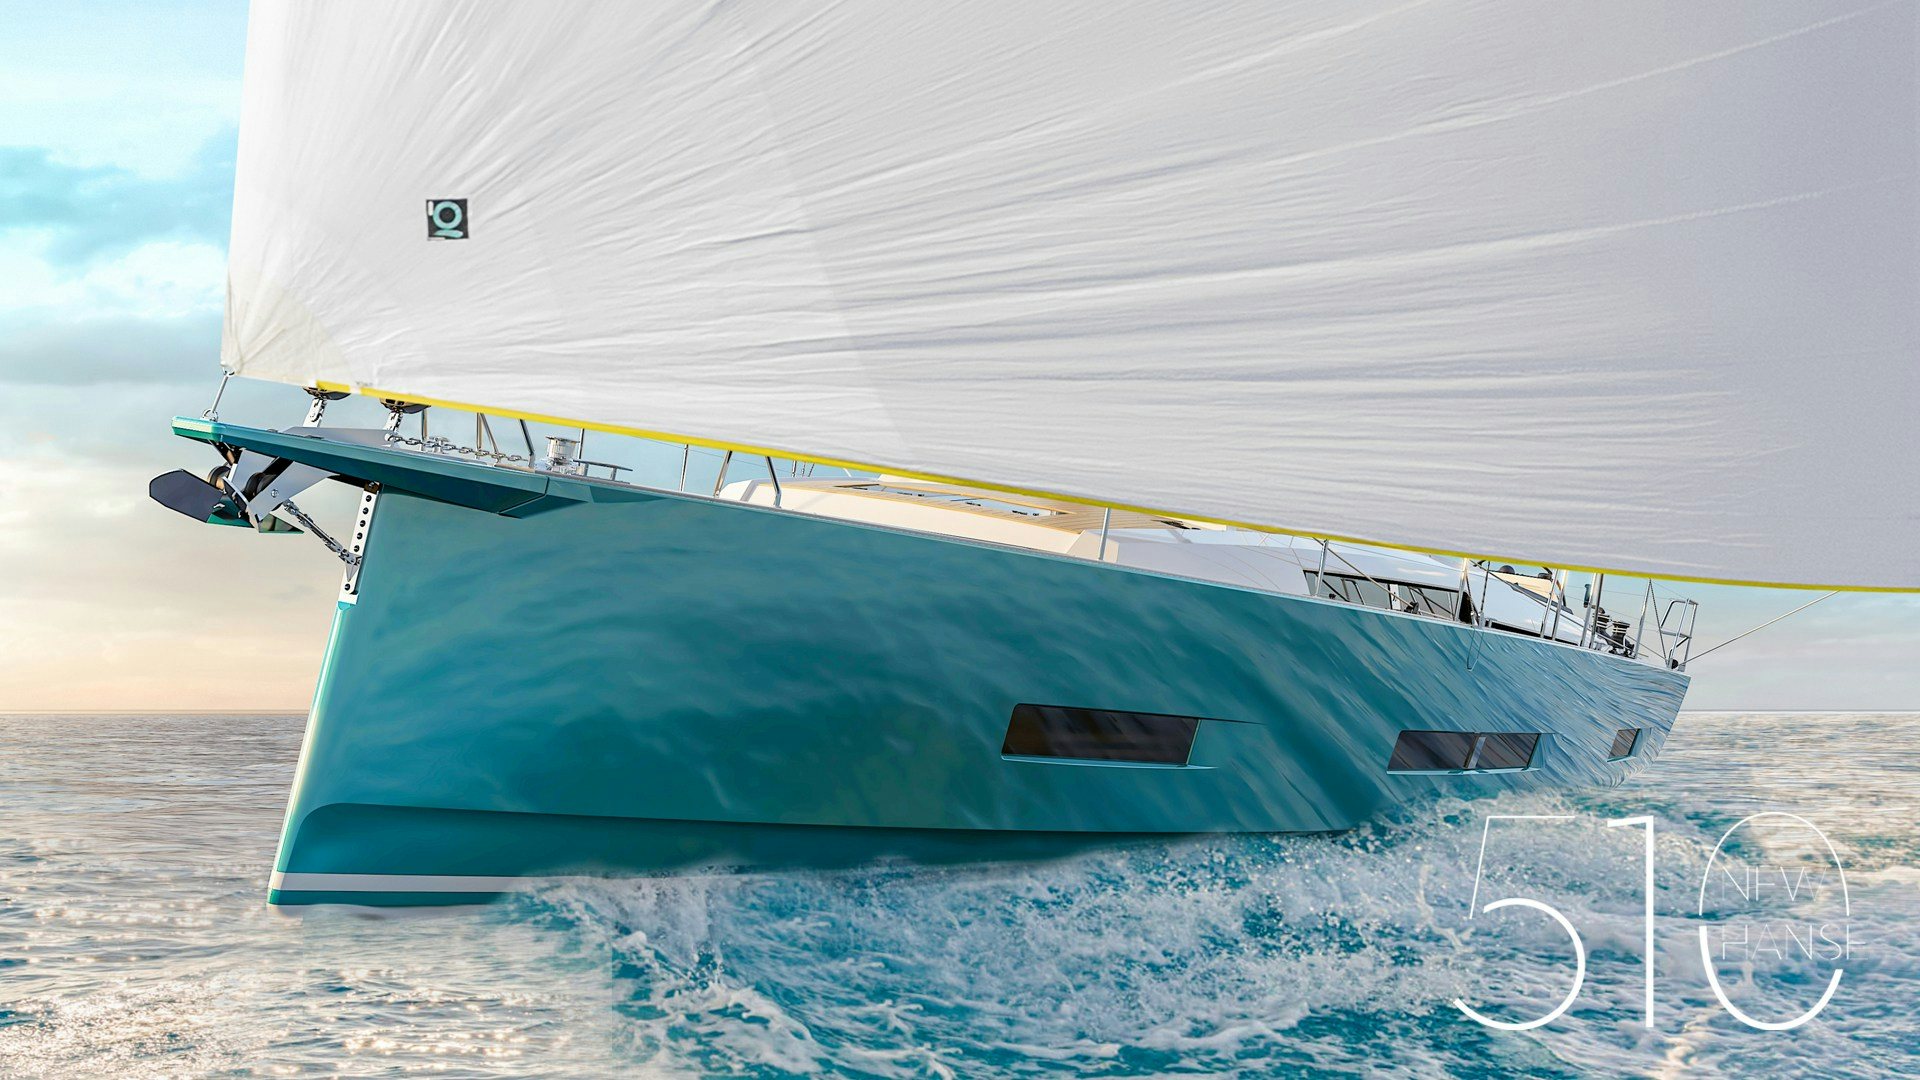 Hanse 510 a  50-foot sailing yacht with a stunning new look, Easy Sailing and Fast Cruising.